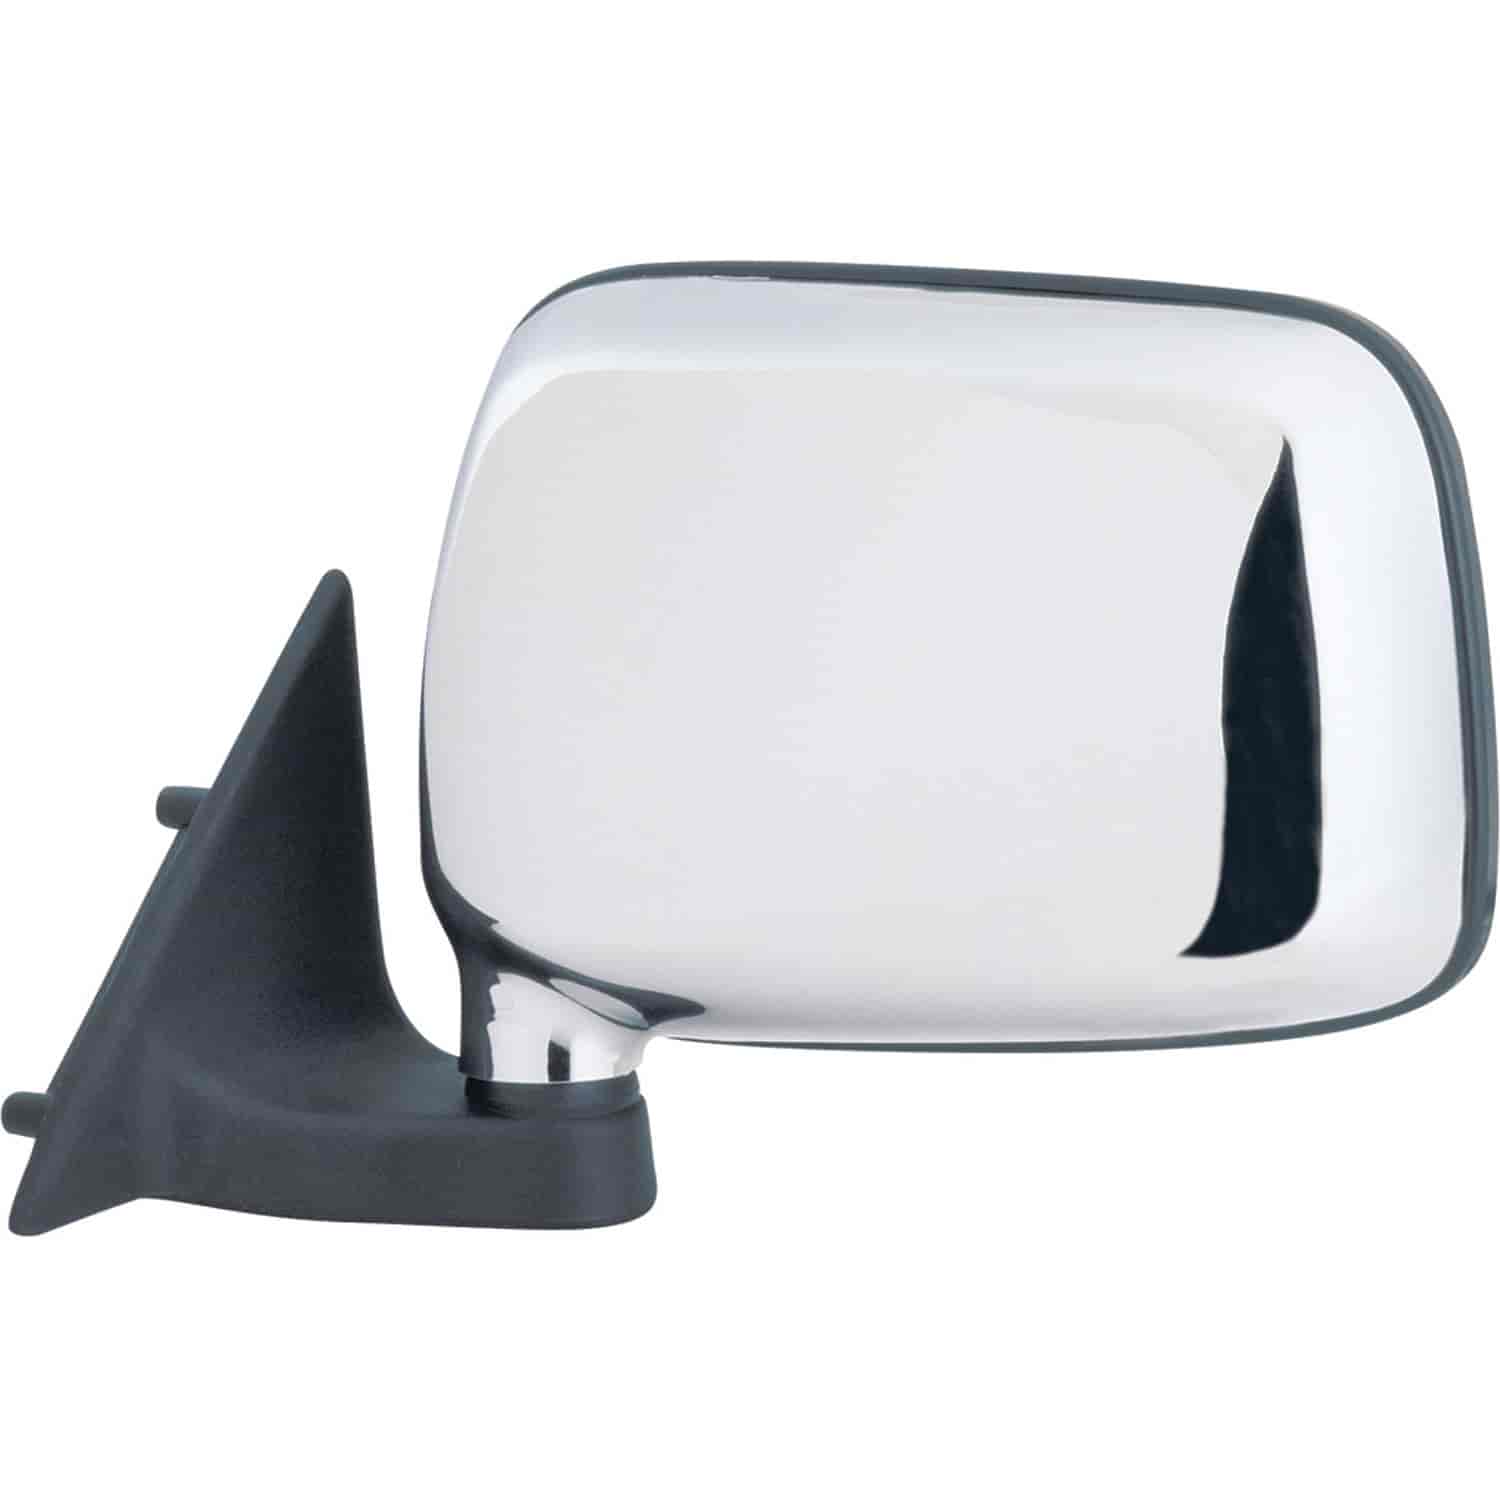 OEM Style Replacement mirror for 86-93 Mazda Pick-Up driver side mirror tested to fit and function l